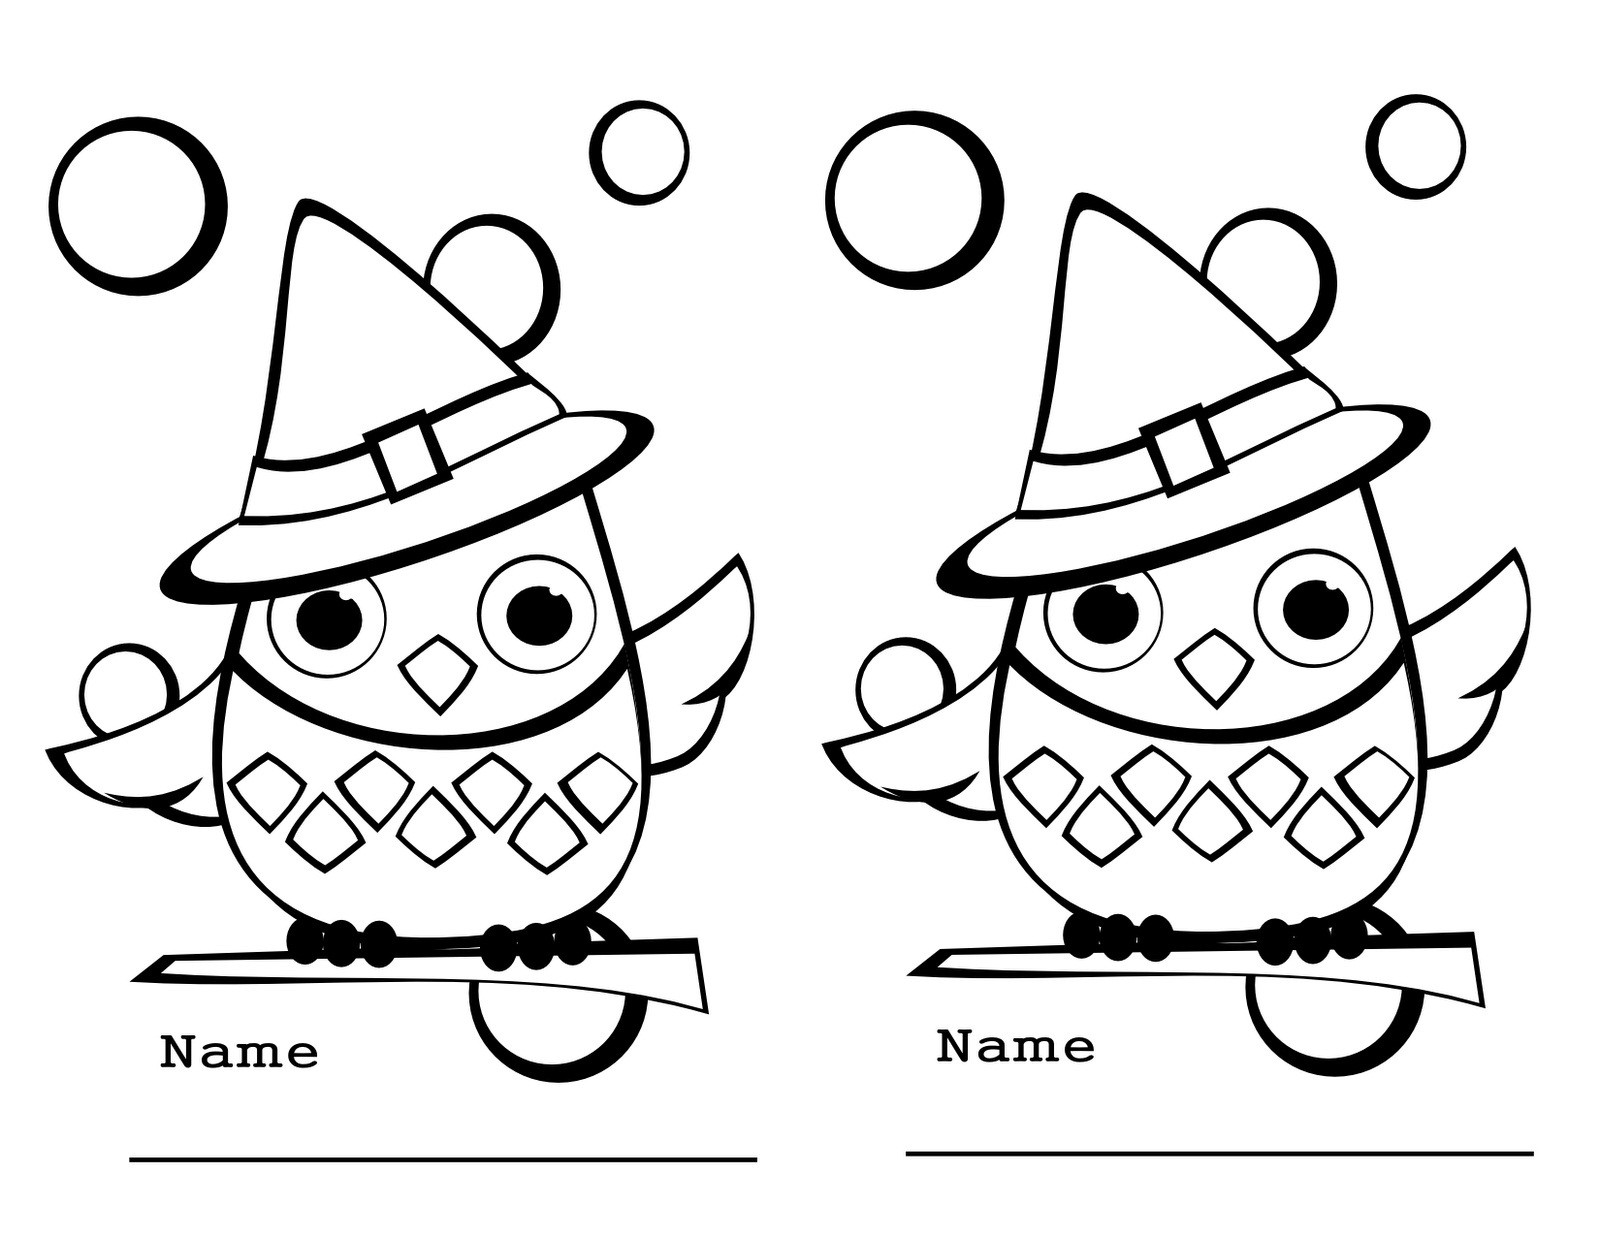 Printable Coloring Sheets For Preschoolers
 Free Printable Kindergarten Coloring Pages For Kids